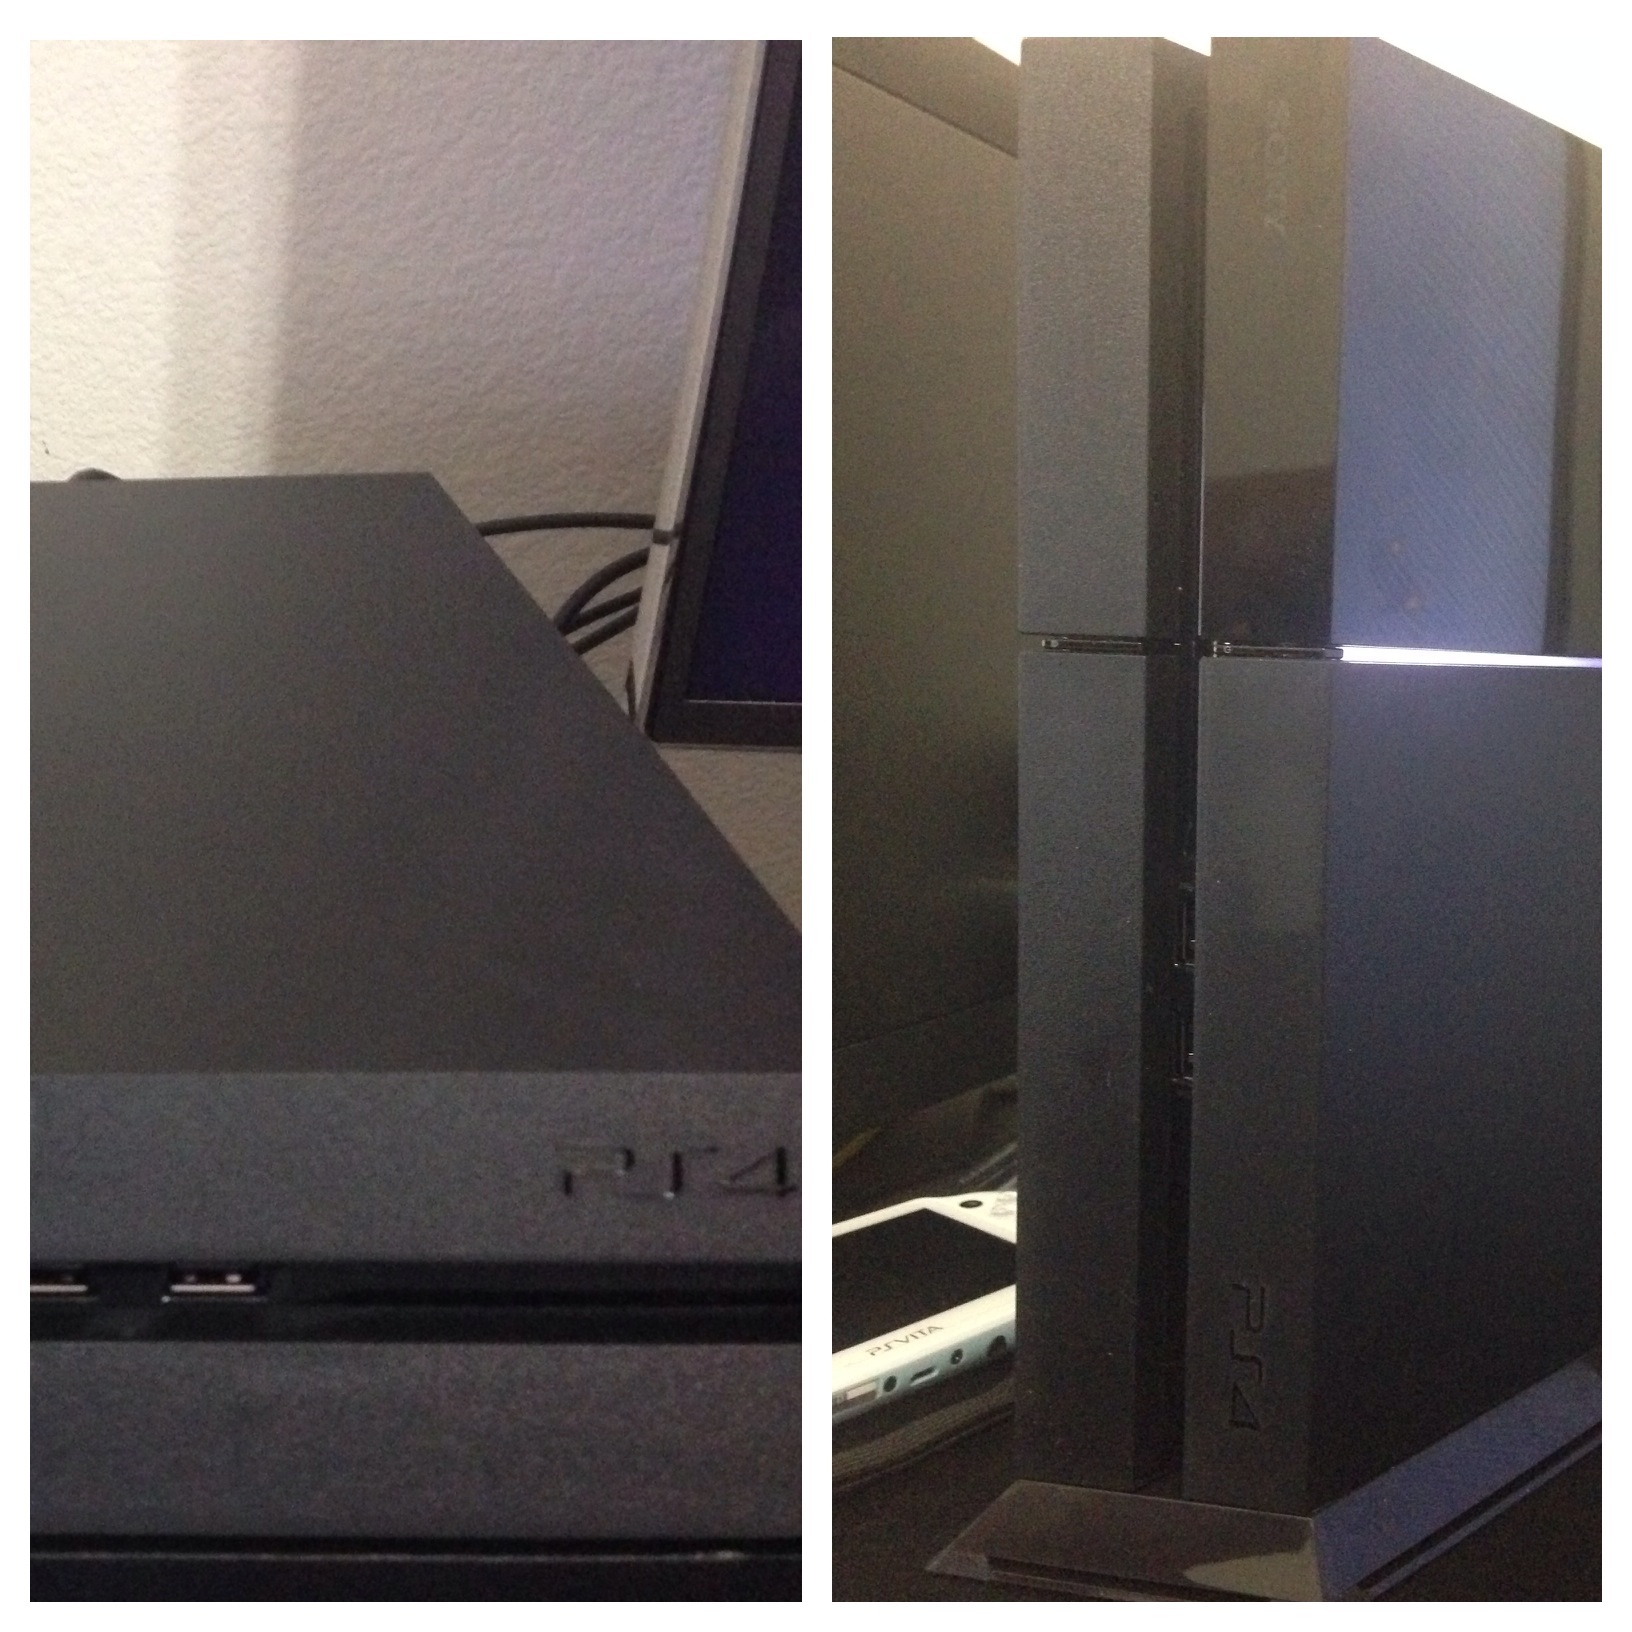 official ps4 vertical stand